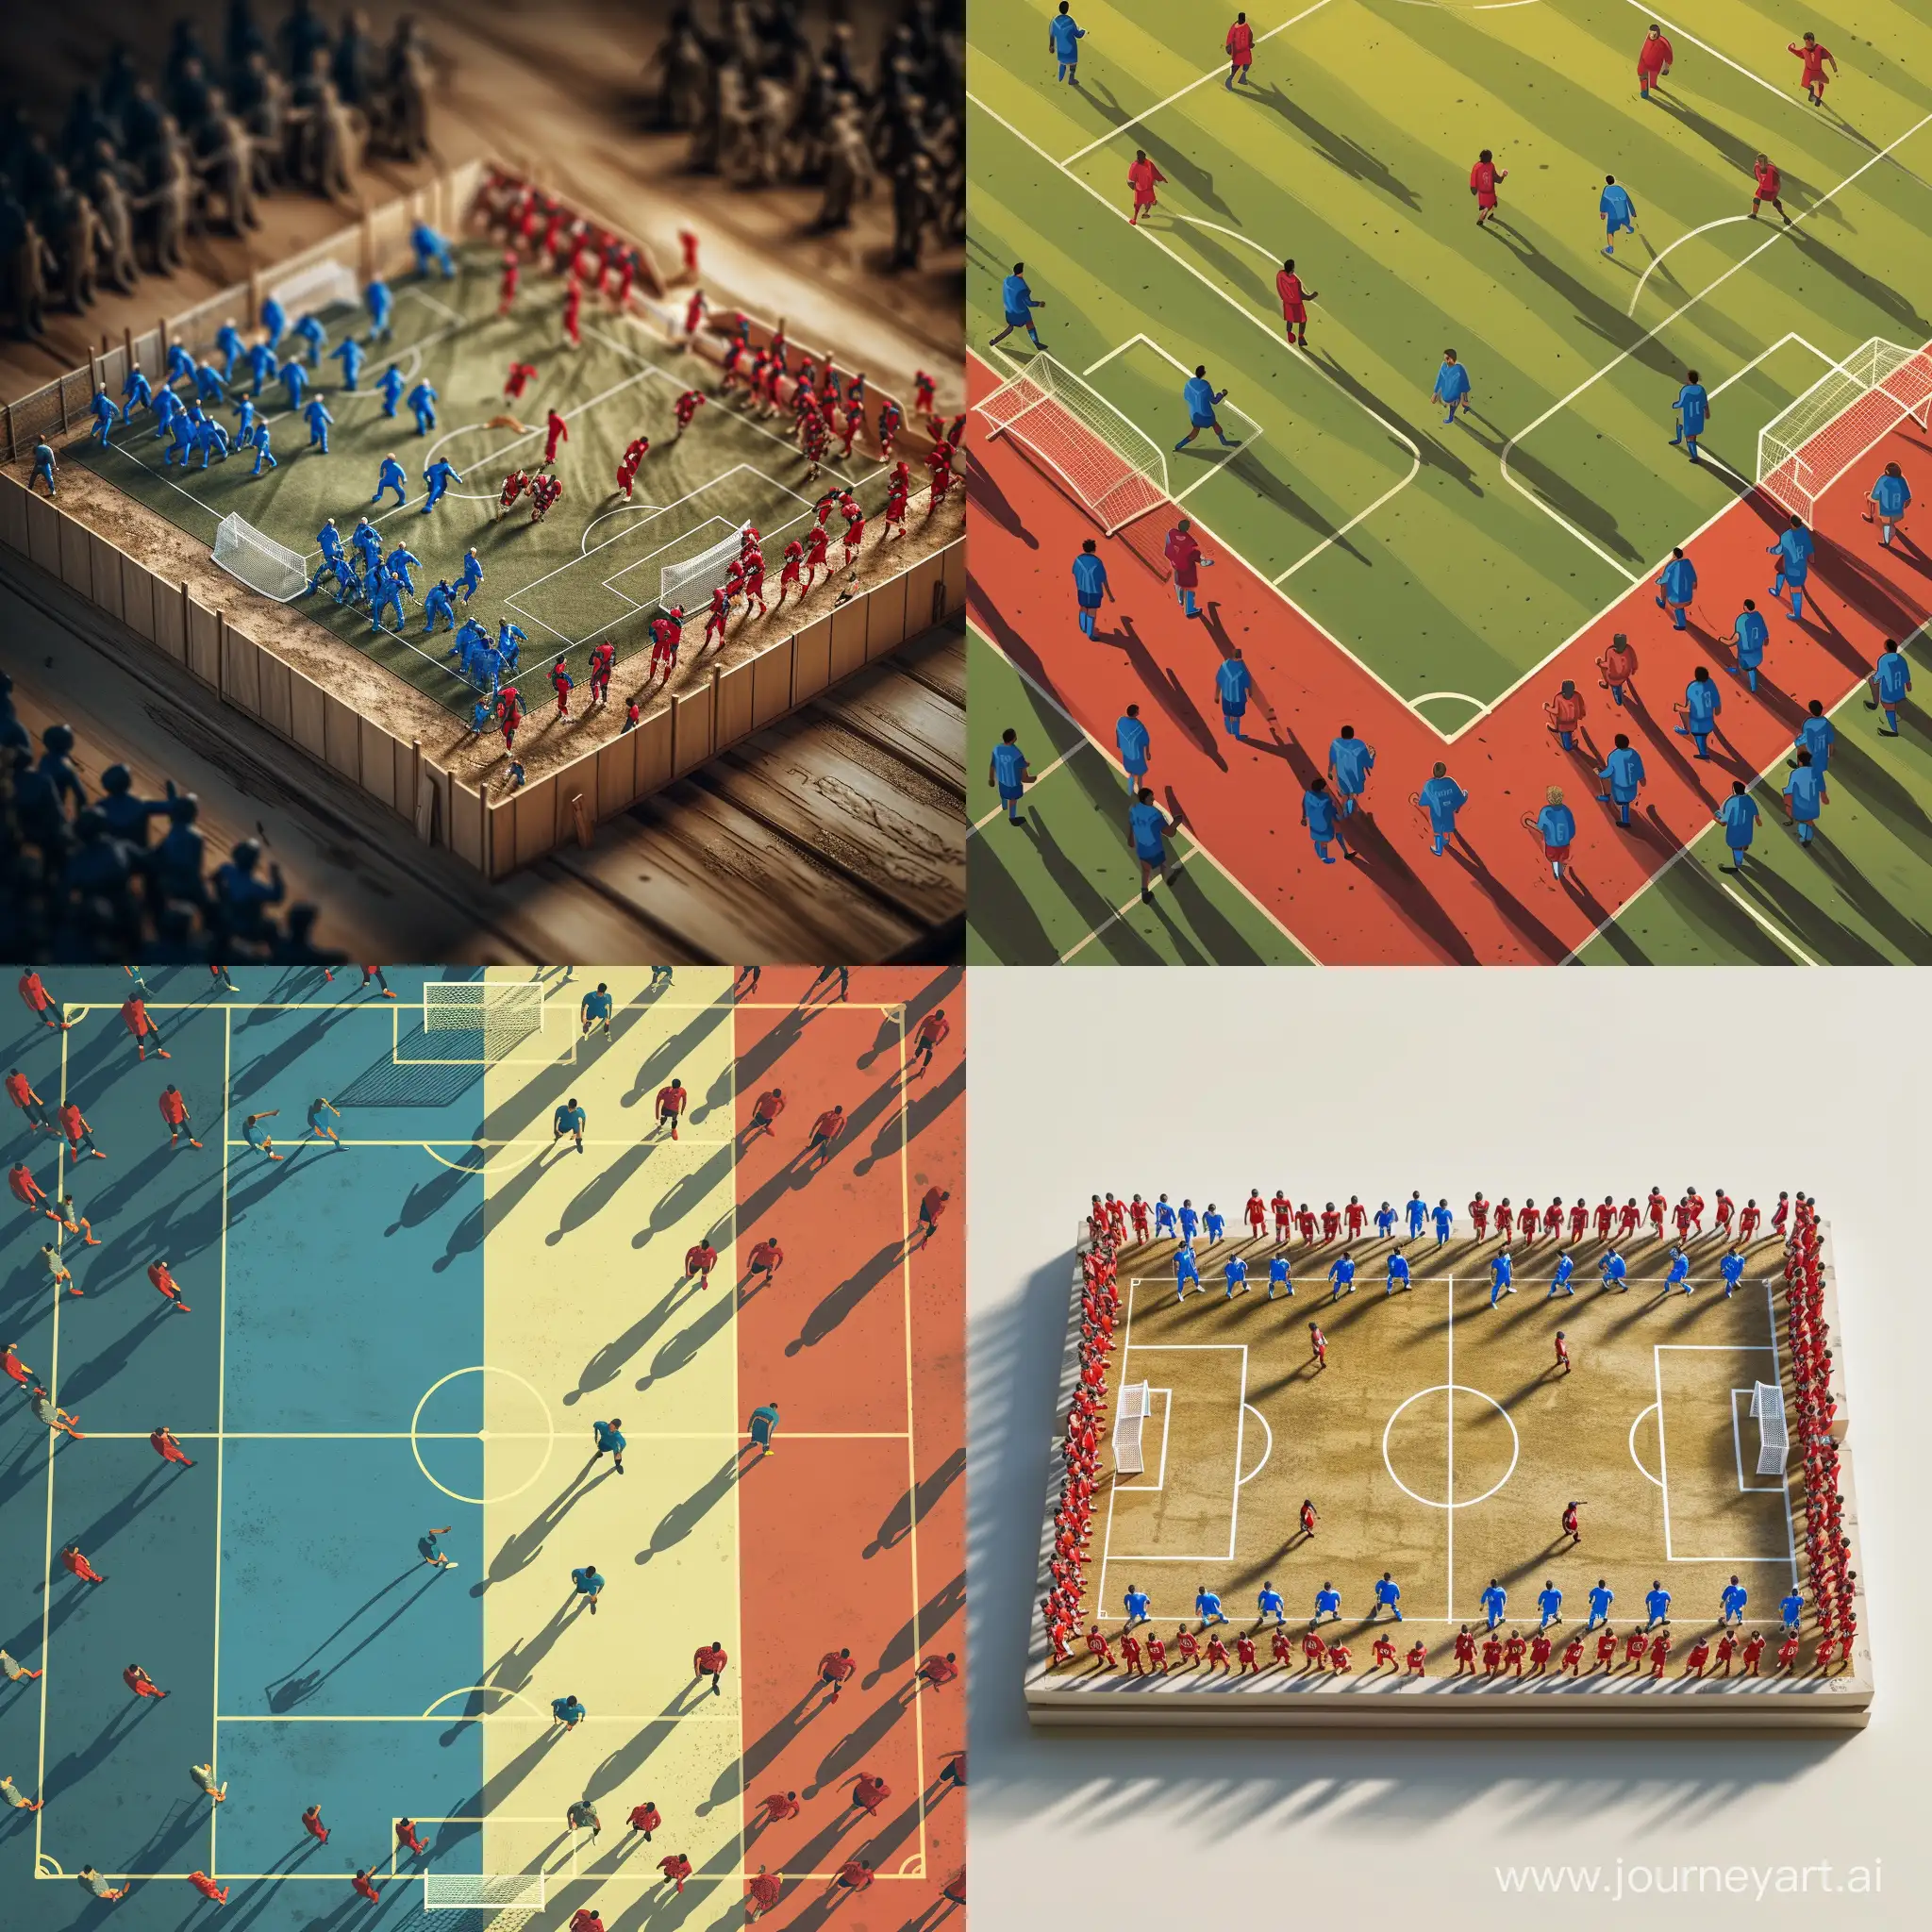 wimmelbilder illustration of a detailed cutaway soccer pitch with two teams, blue and red, each Has 11 players 